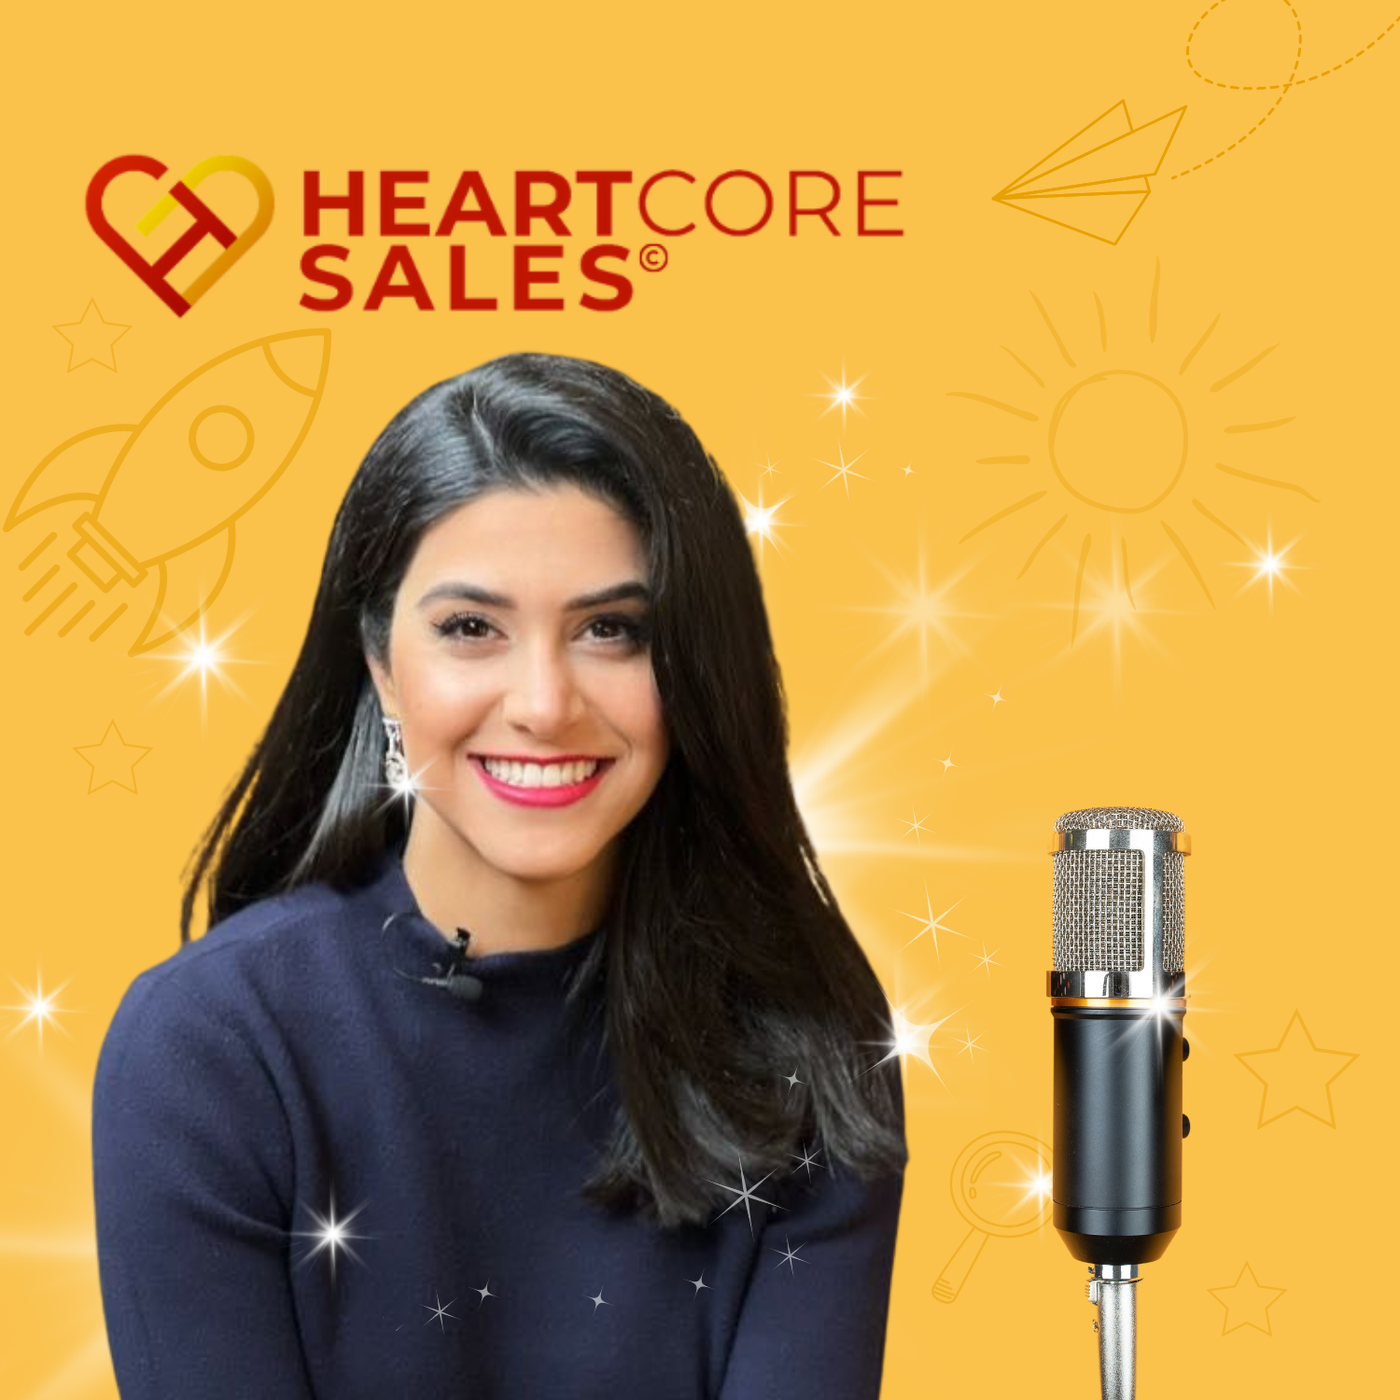 HeartcoreSales - Sales, Personal Development and Business